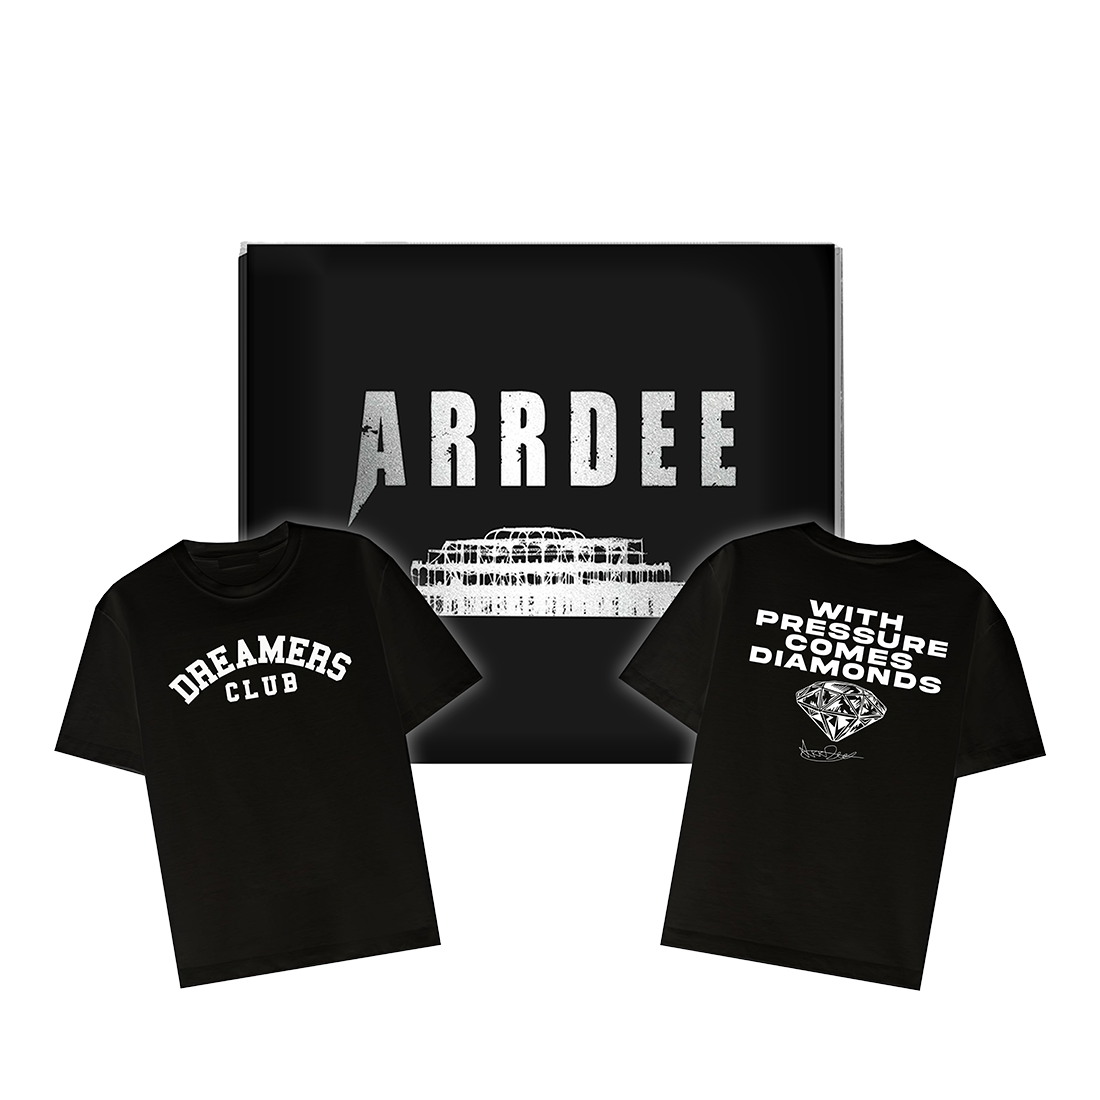 Dreamers Club x Arrdee Limited Edition Black Tee - ArrDee - Official Website